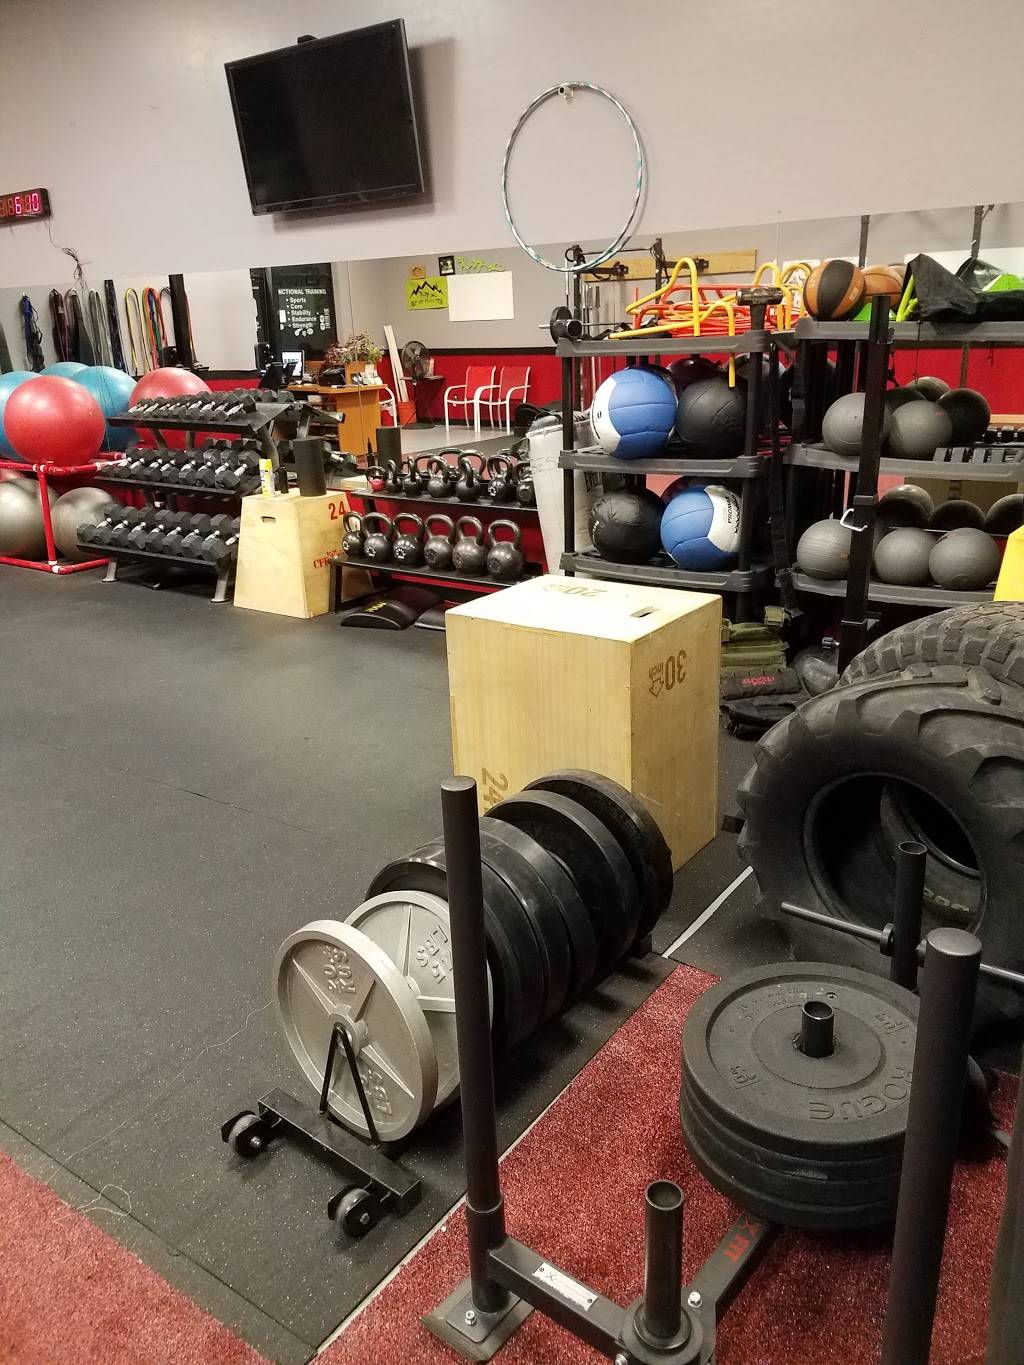 Glendale Strength and Conditioning | 6808 N Dysart Rd #136, Glendale, AZ 85307, USA | Phone: (602) 561-1300